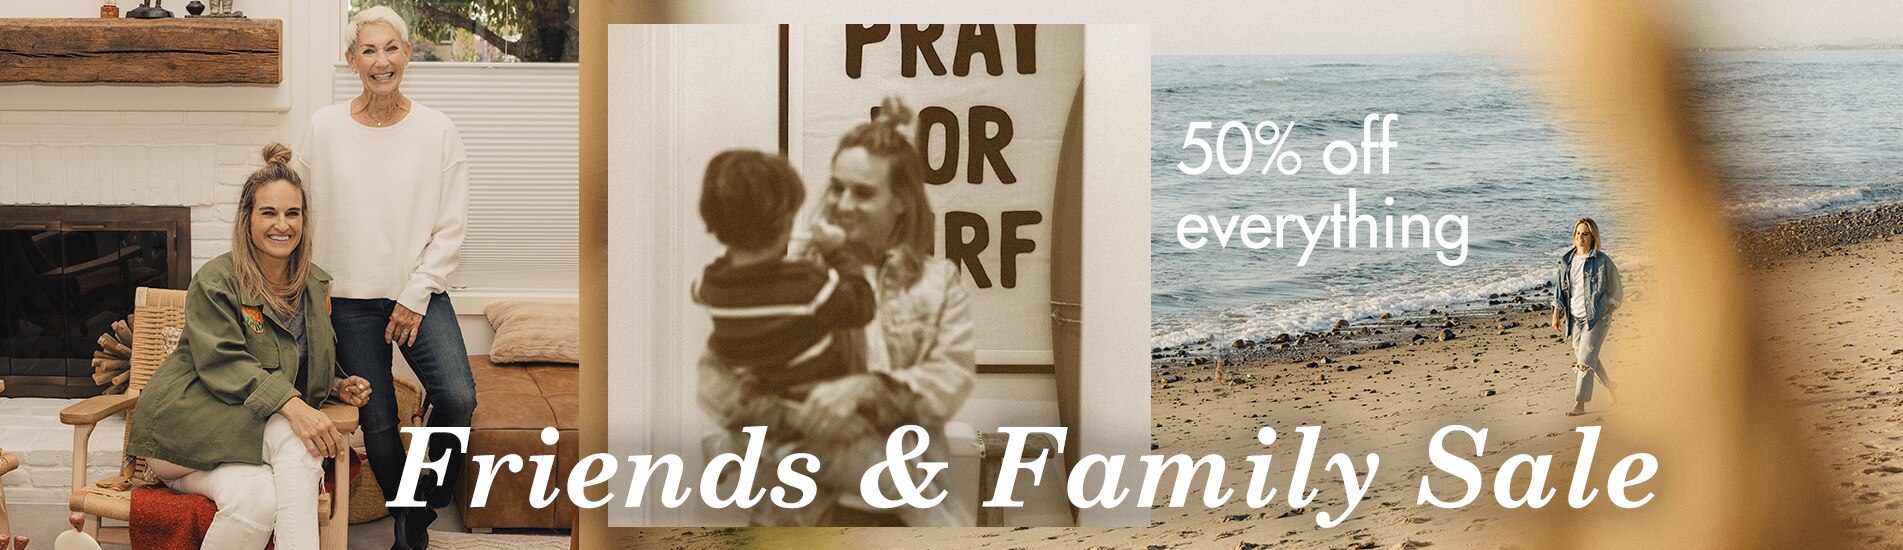 Friends & Family Sale starts now, take 50% off everything